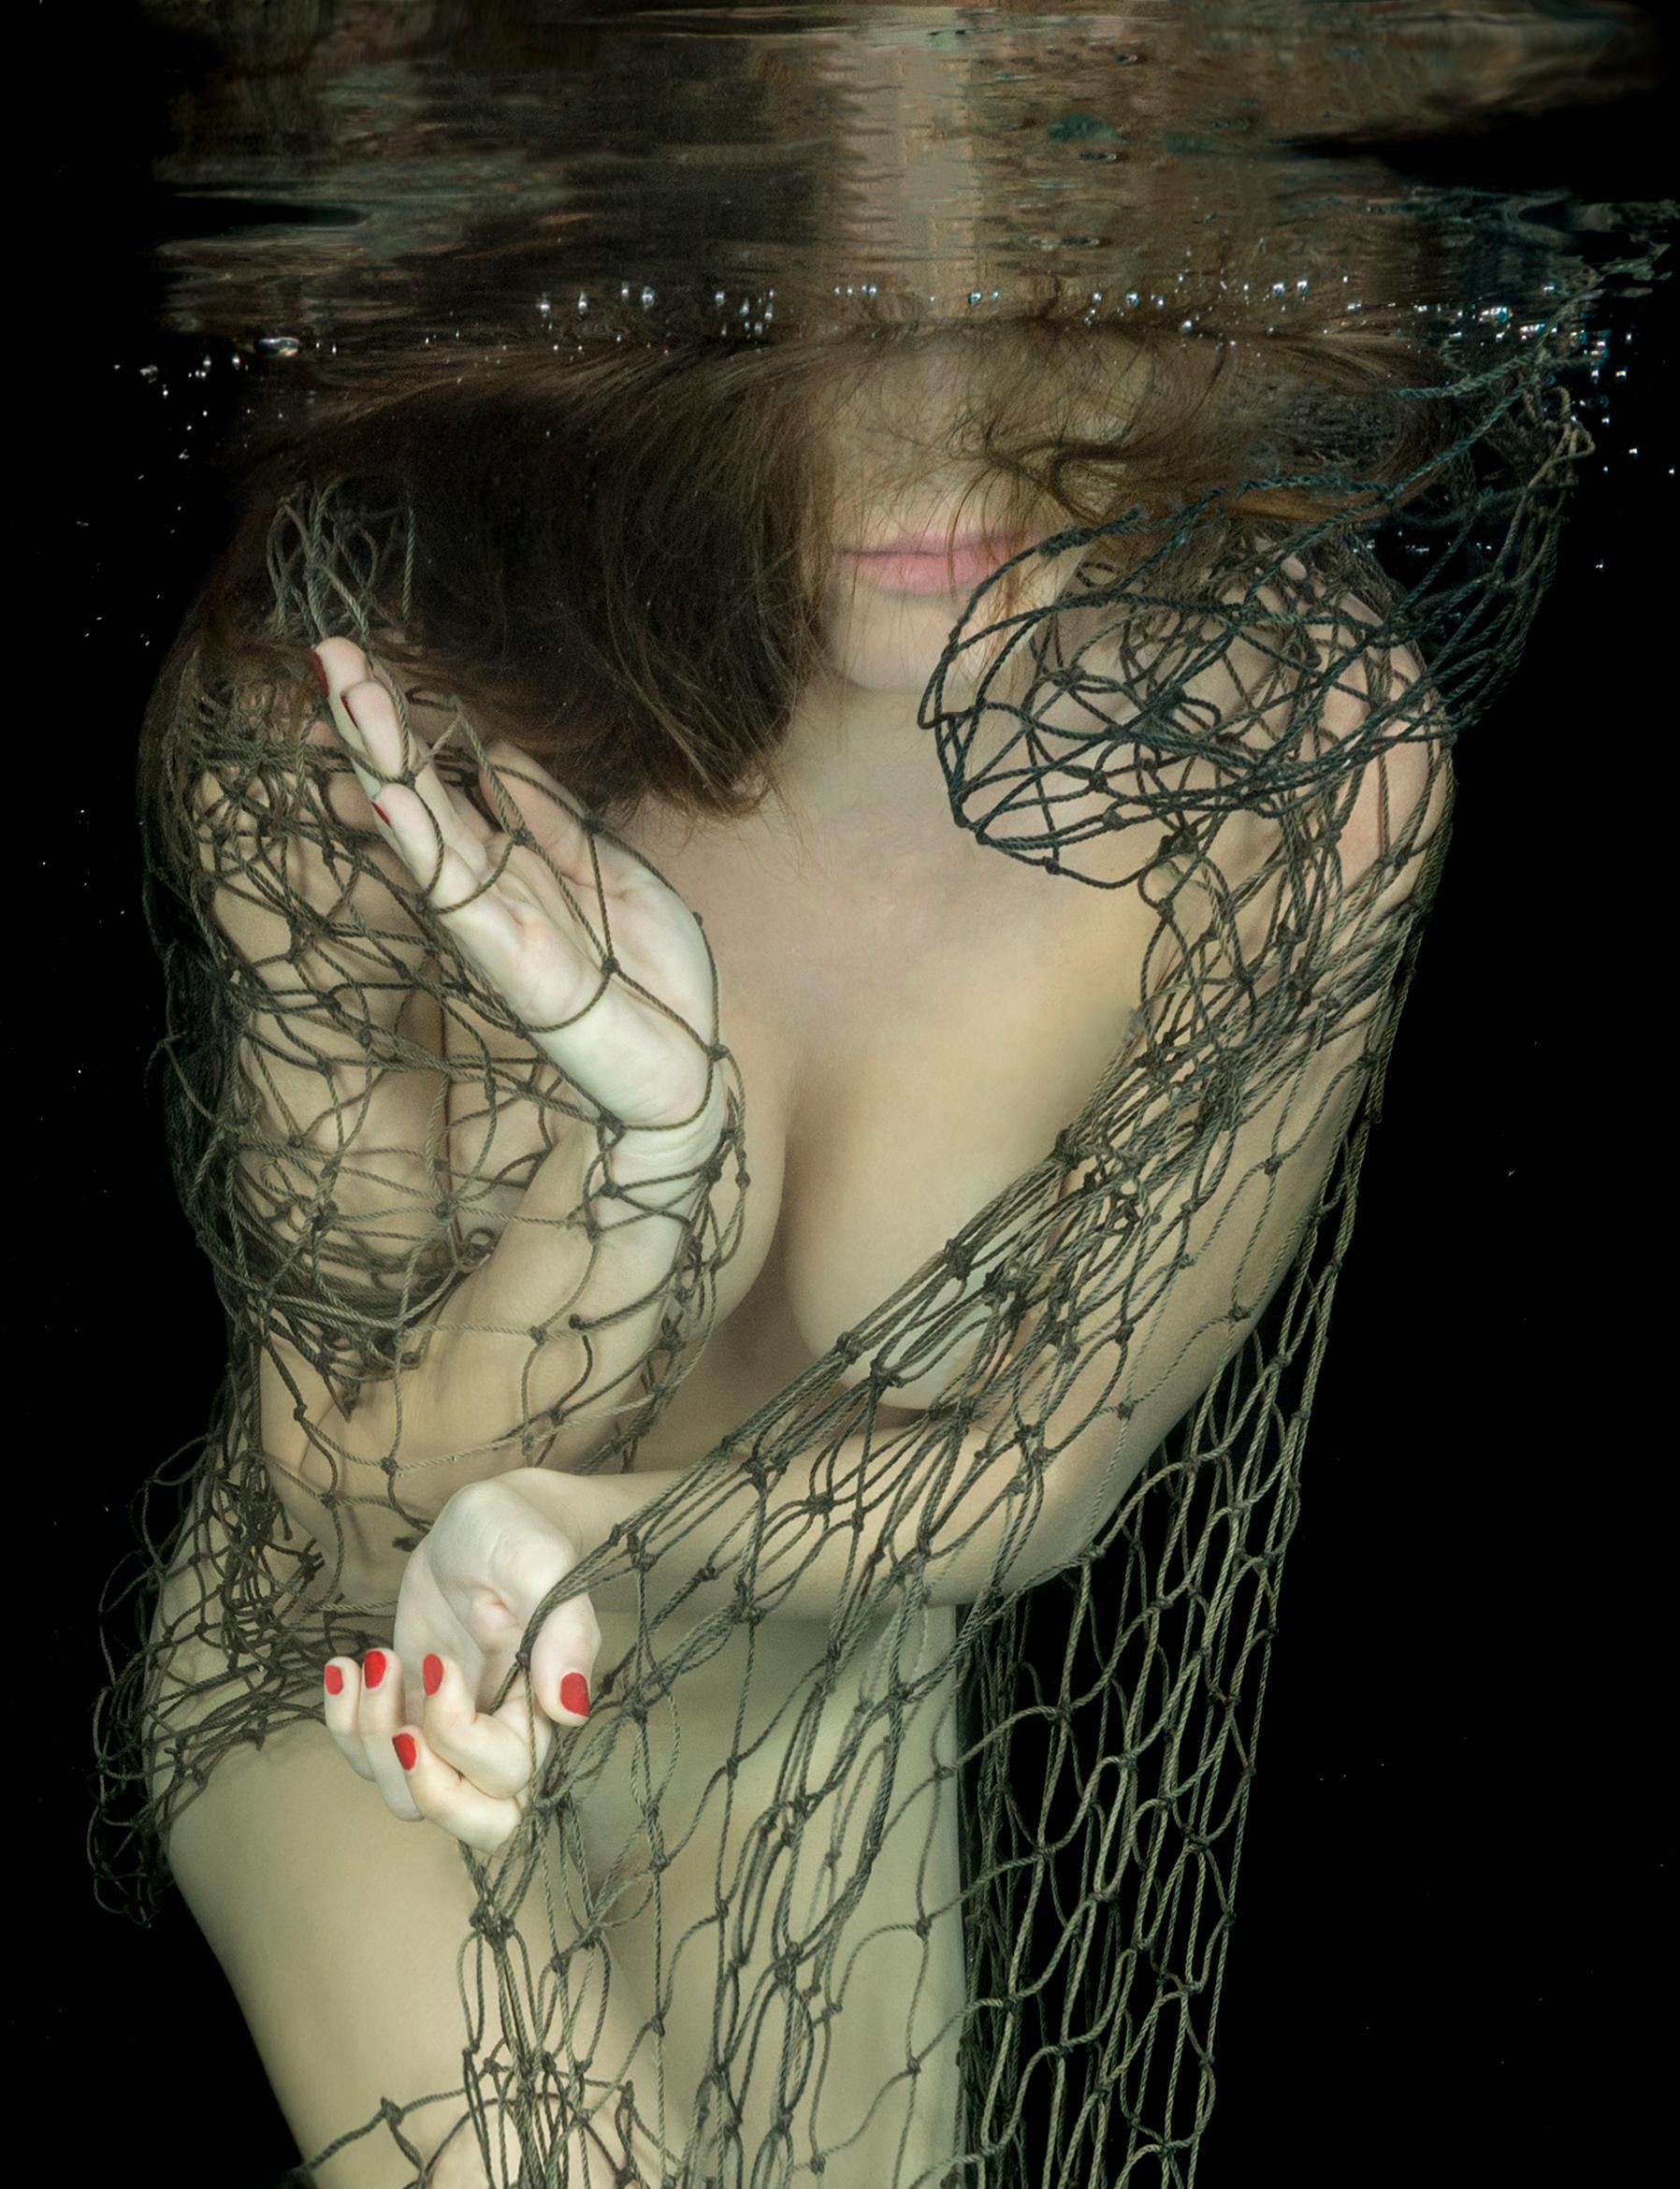 Lucky Catch - underwater nude photograph - archival pigment print 58" x 43"